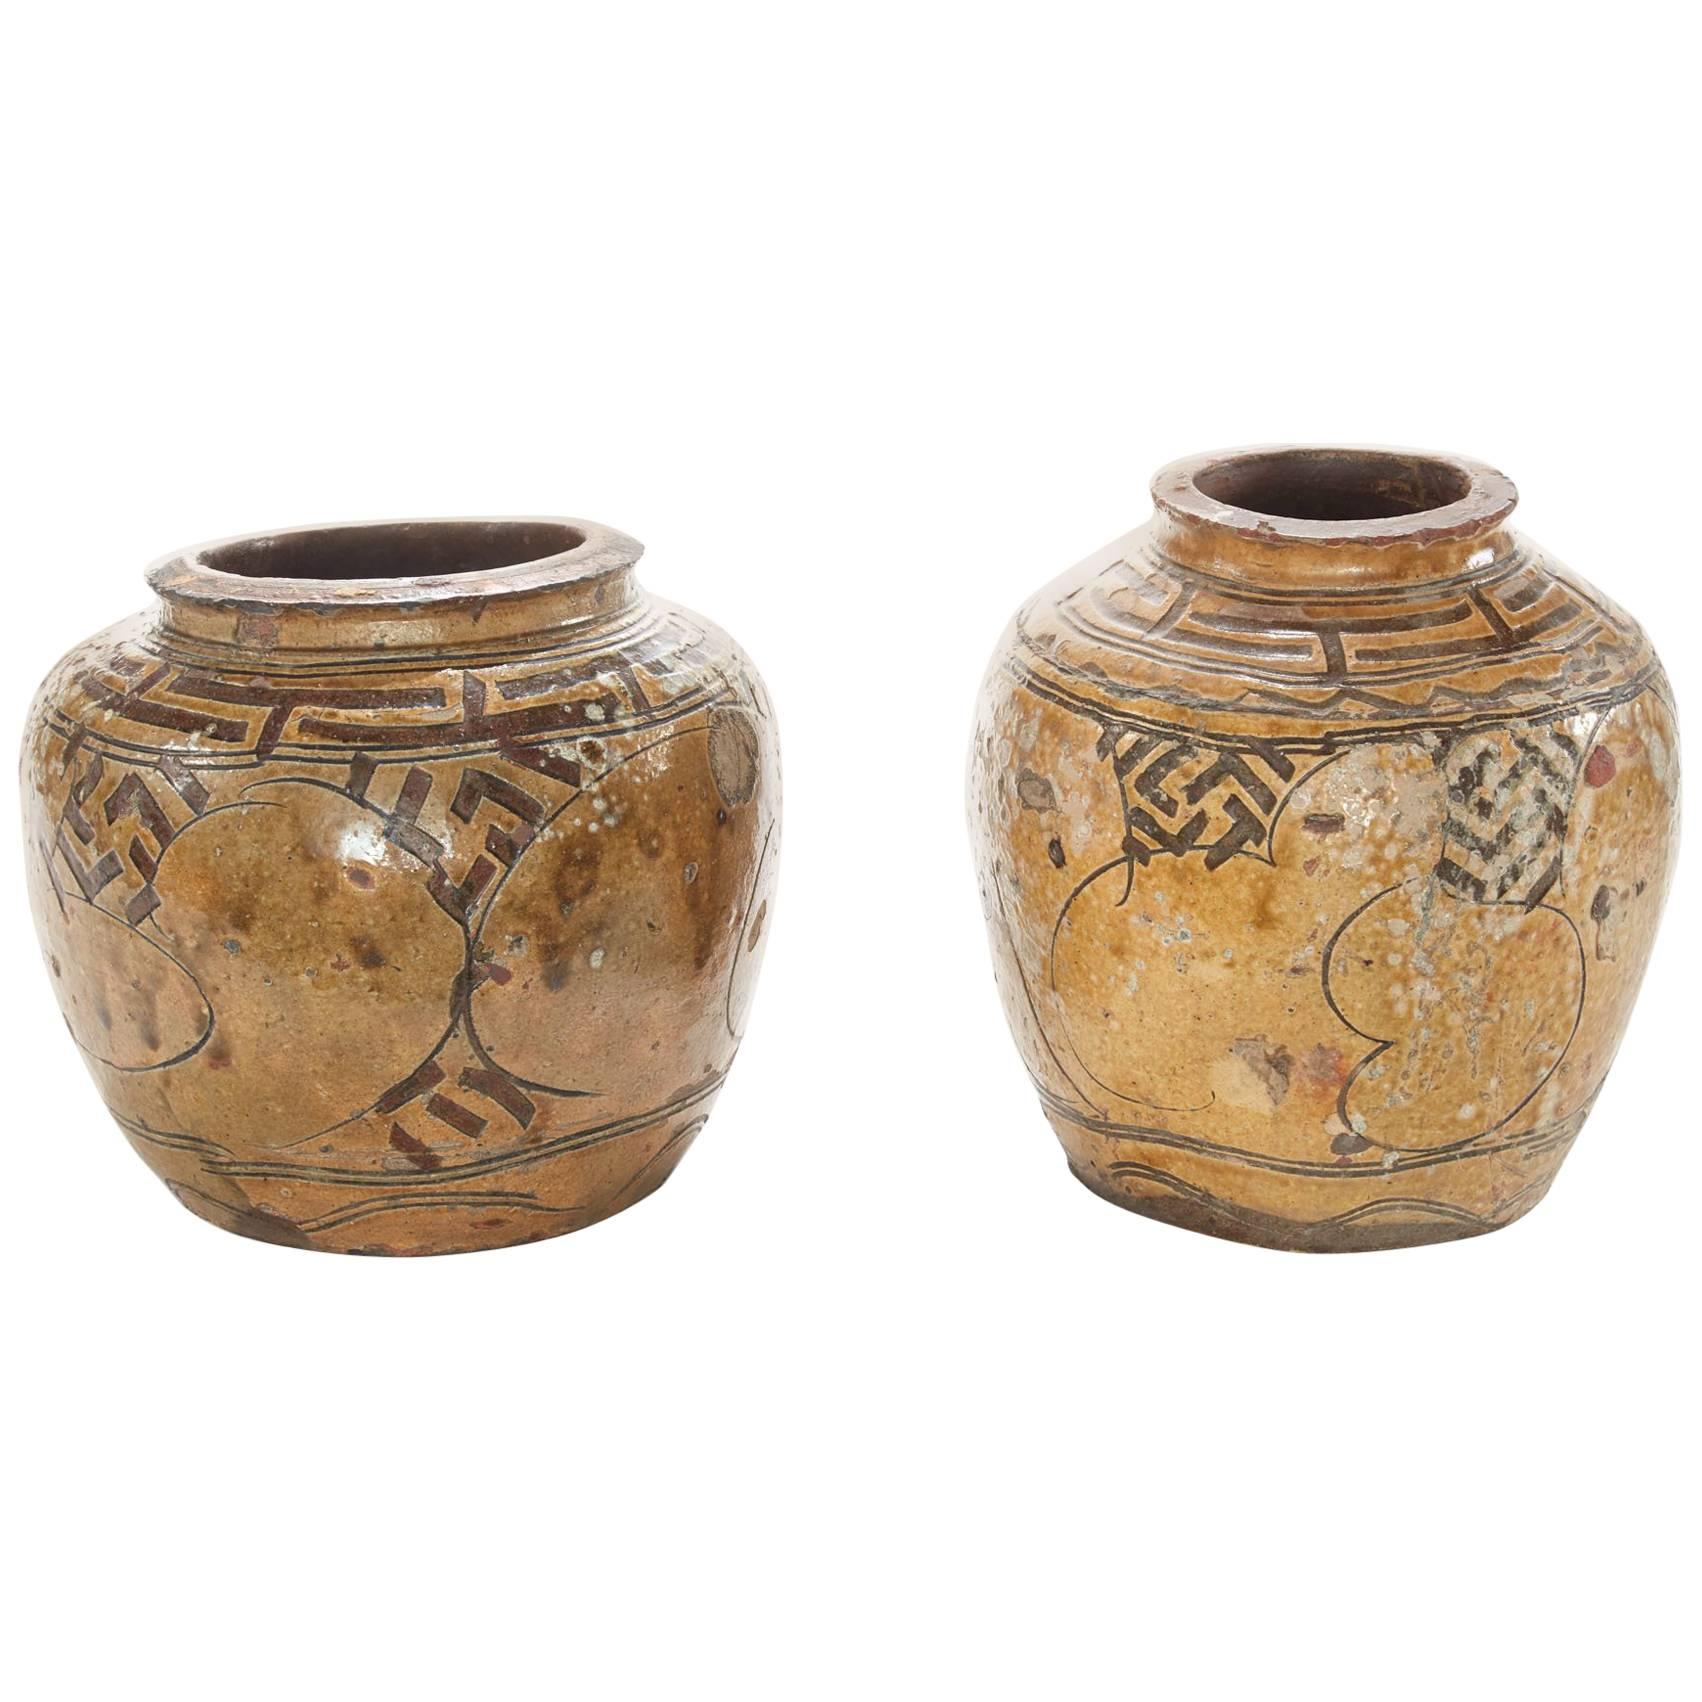 Two of a Pair of 19th Century Glazed Asian Pots